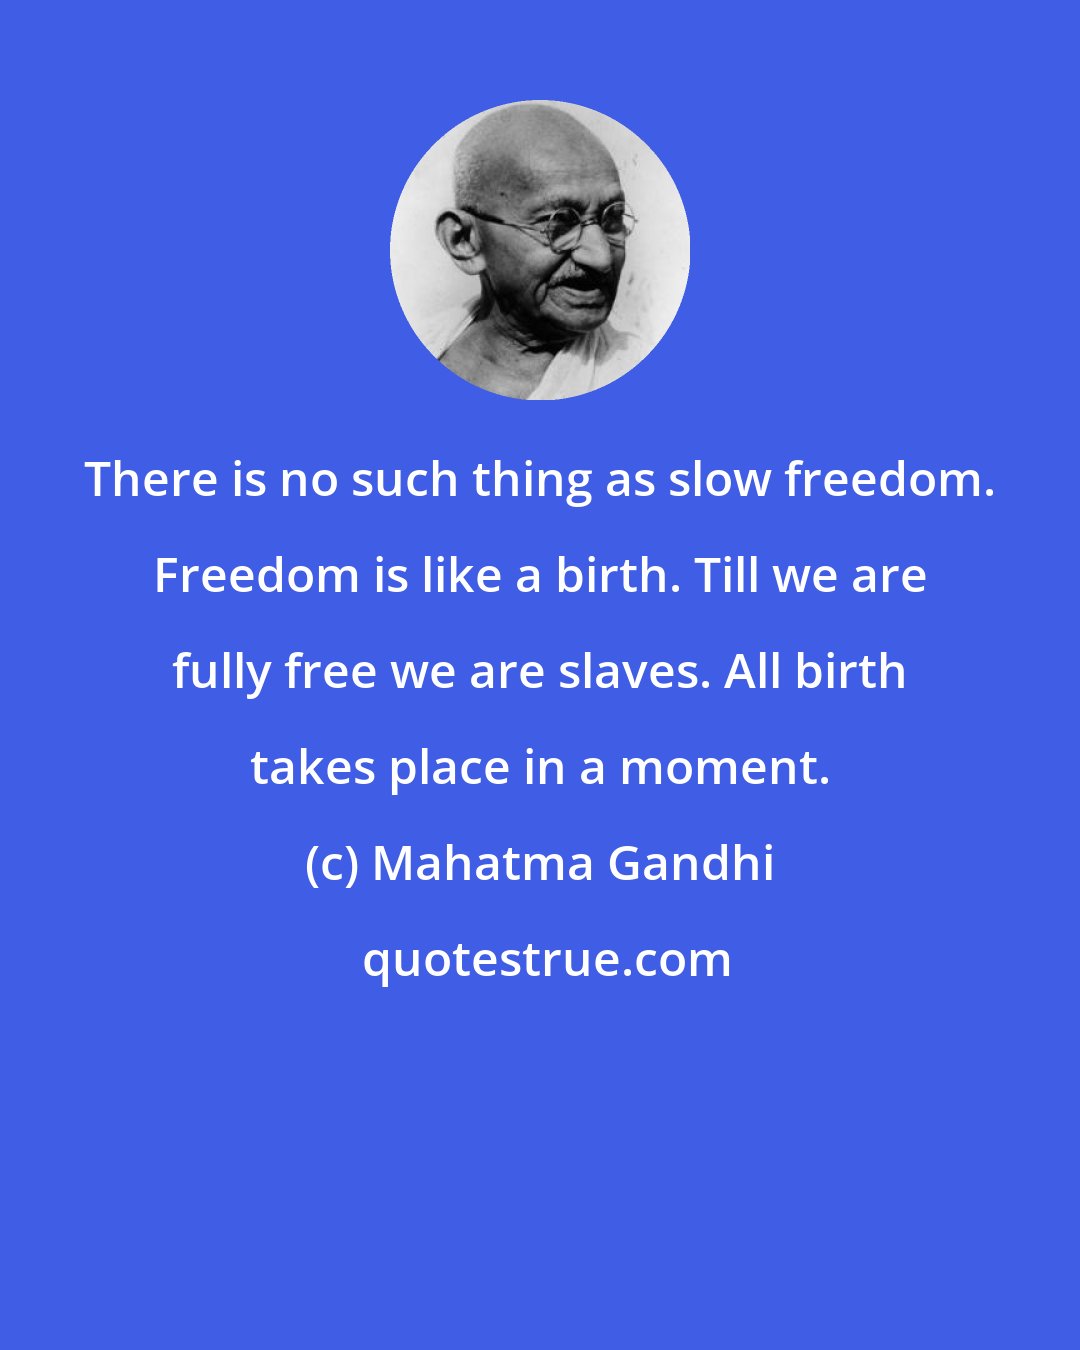 Mahatma Gandhi: There is no such thing as slow freedom. Freedom is like a birth. Till we are fully free we are slaves. All birth takes place in a moment.